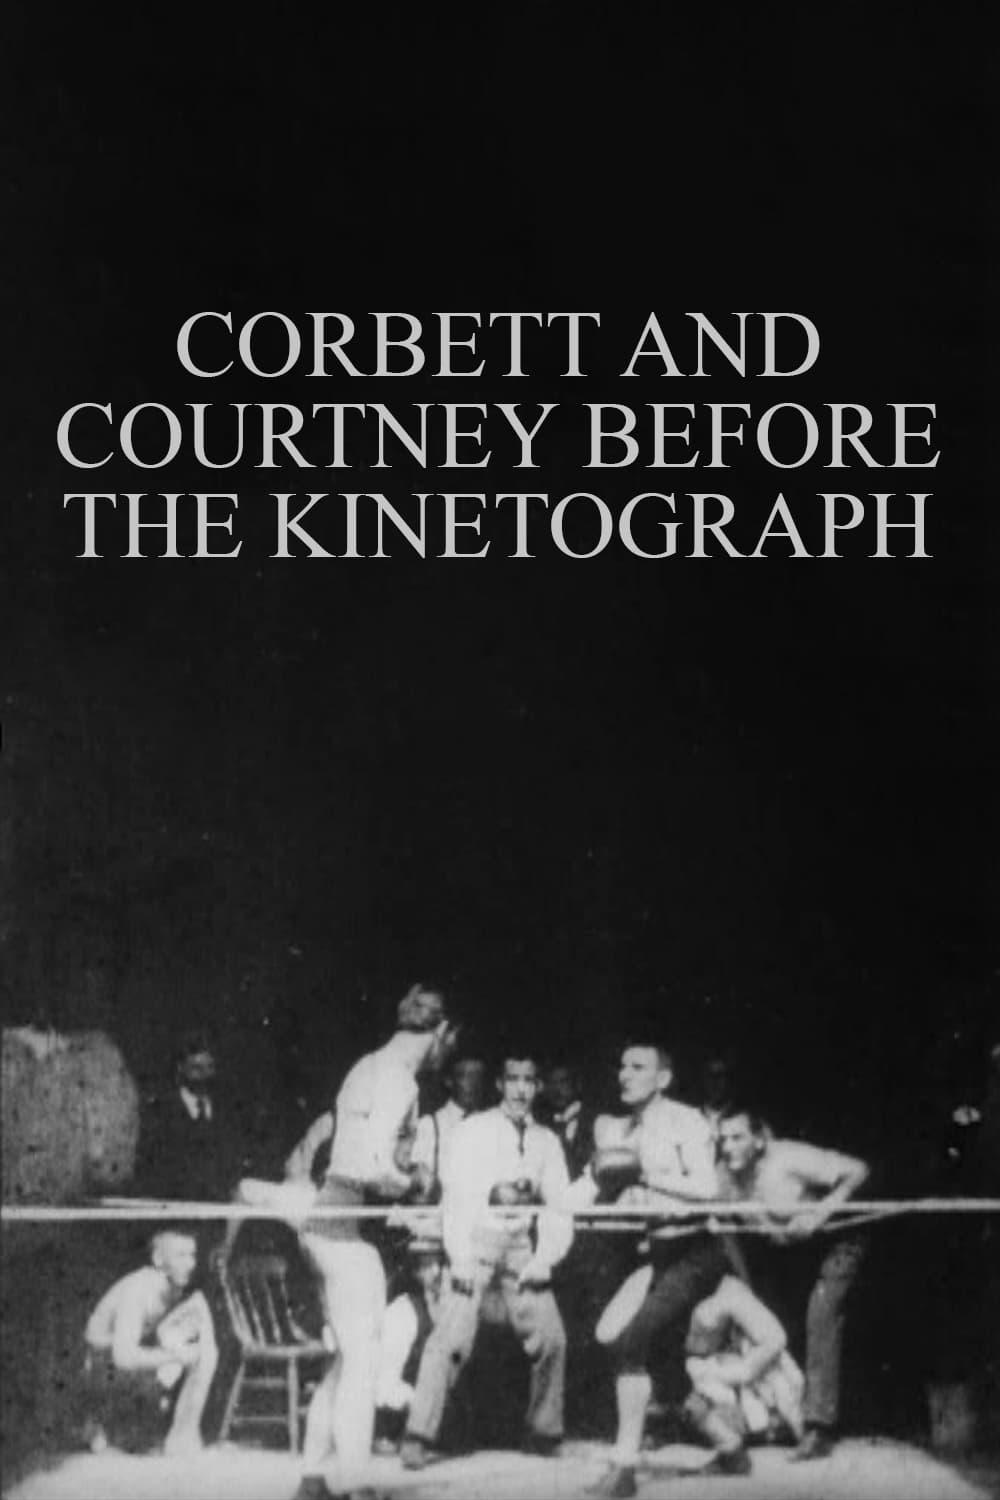 Corbett and Courtney Before the Kinetograph poster